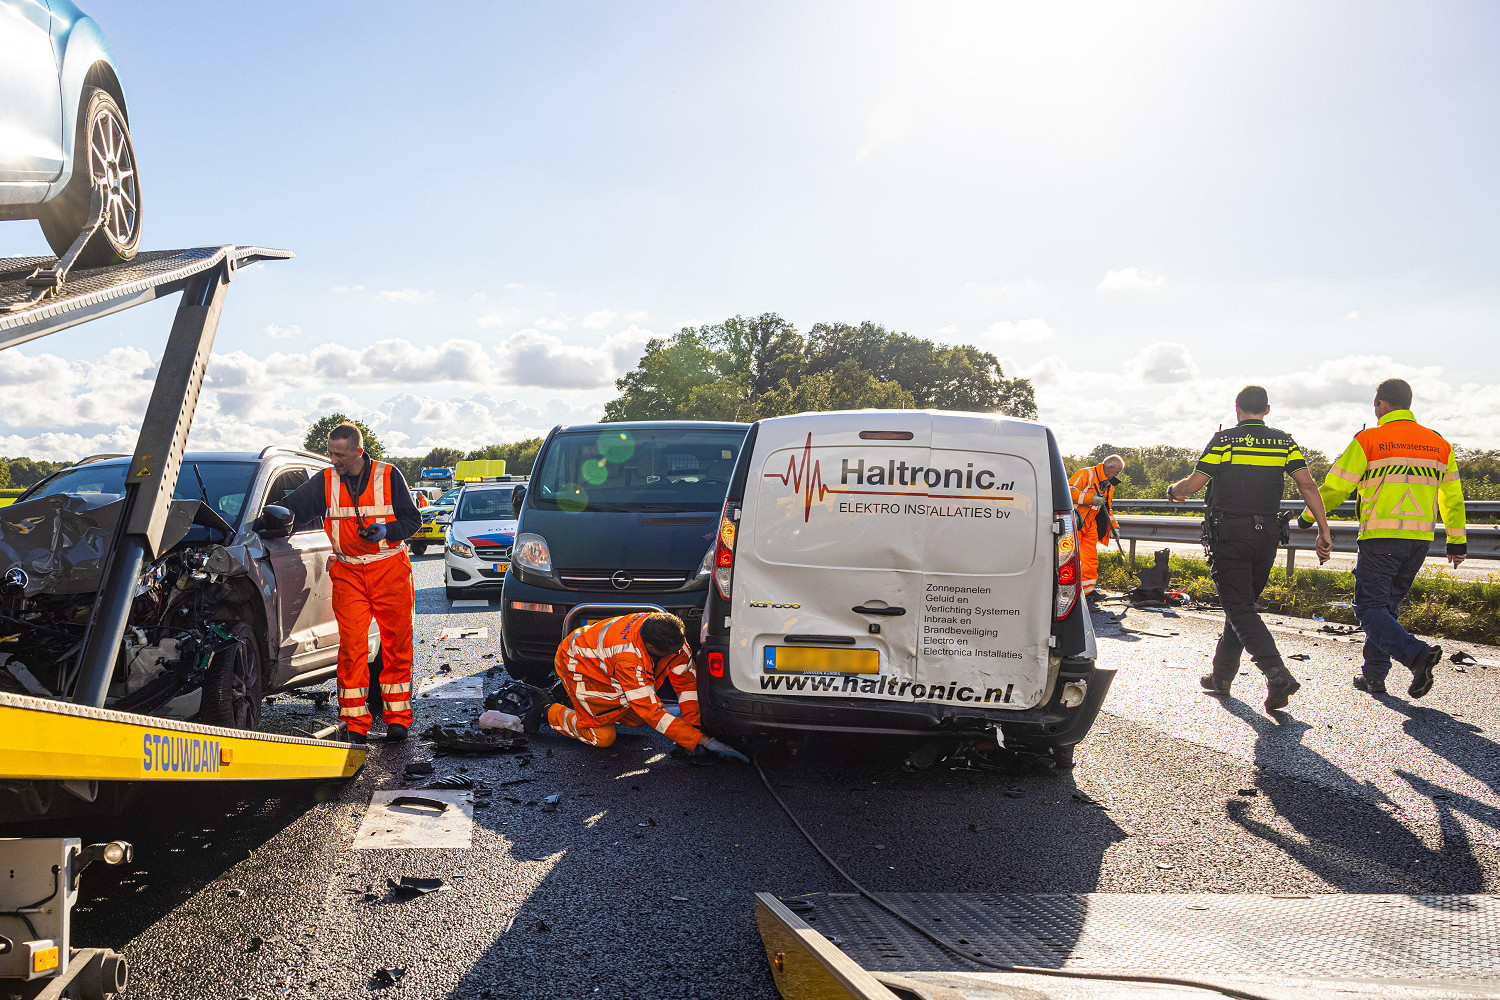 Marcel Bosch (L) and Dirk Wolf of Kraan- en Bergingsbedrijf Stouwdam in a big clean-up on the A28 at Wezep on 6 October 2021. The accident was reported by EDO